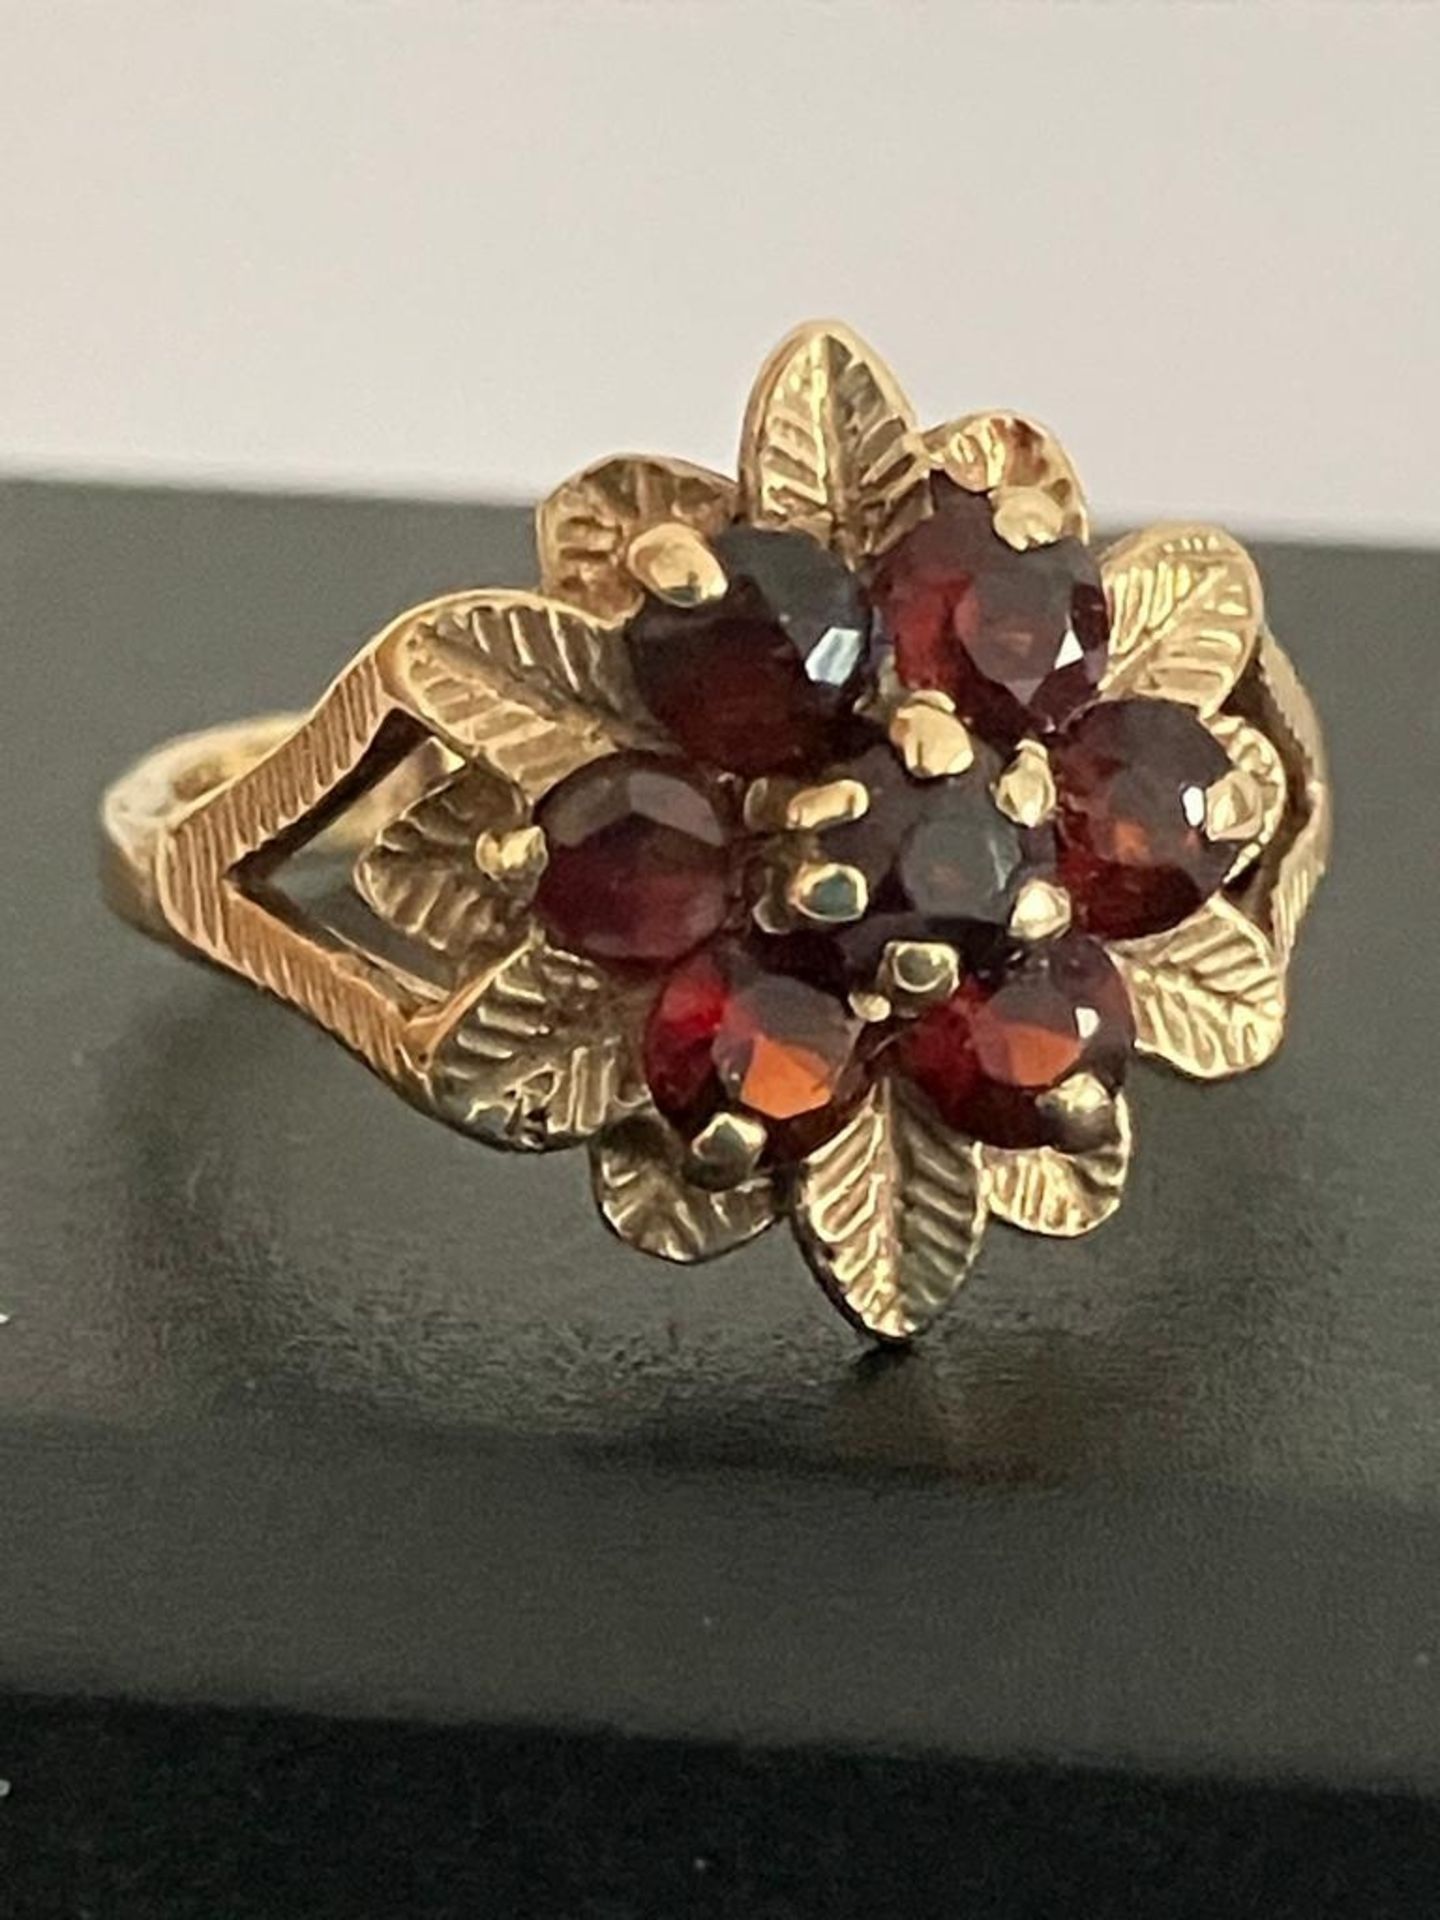 Vintage 9 carat GOLD RING Set to top with GARNETS and GOLD LEAVES in floral formation. Full UK